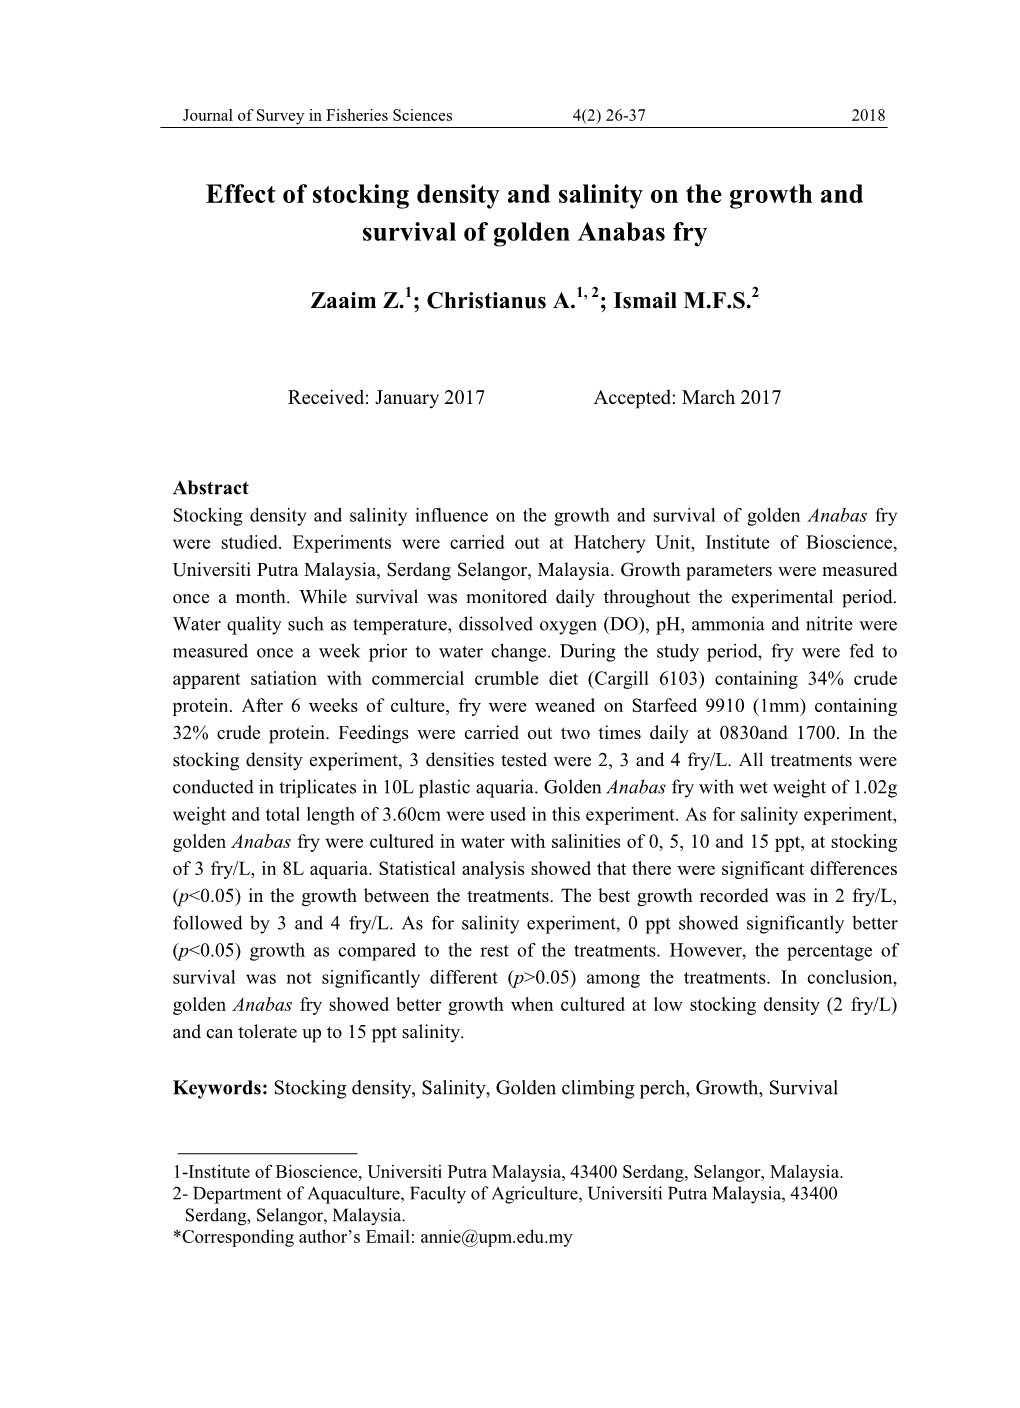 Effect of Stocking Density and Salinity on the Growth and Survival of Golden Anabas Fry